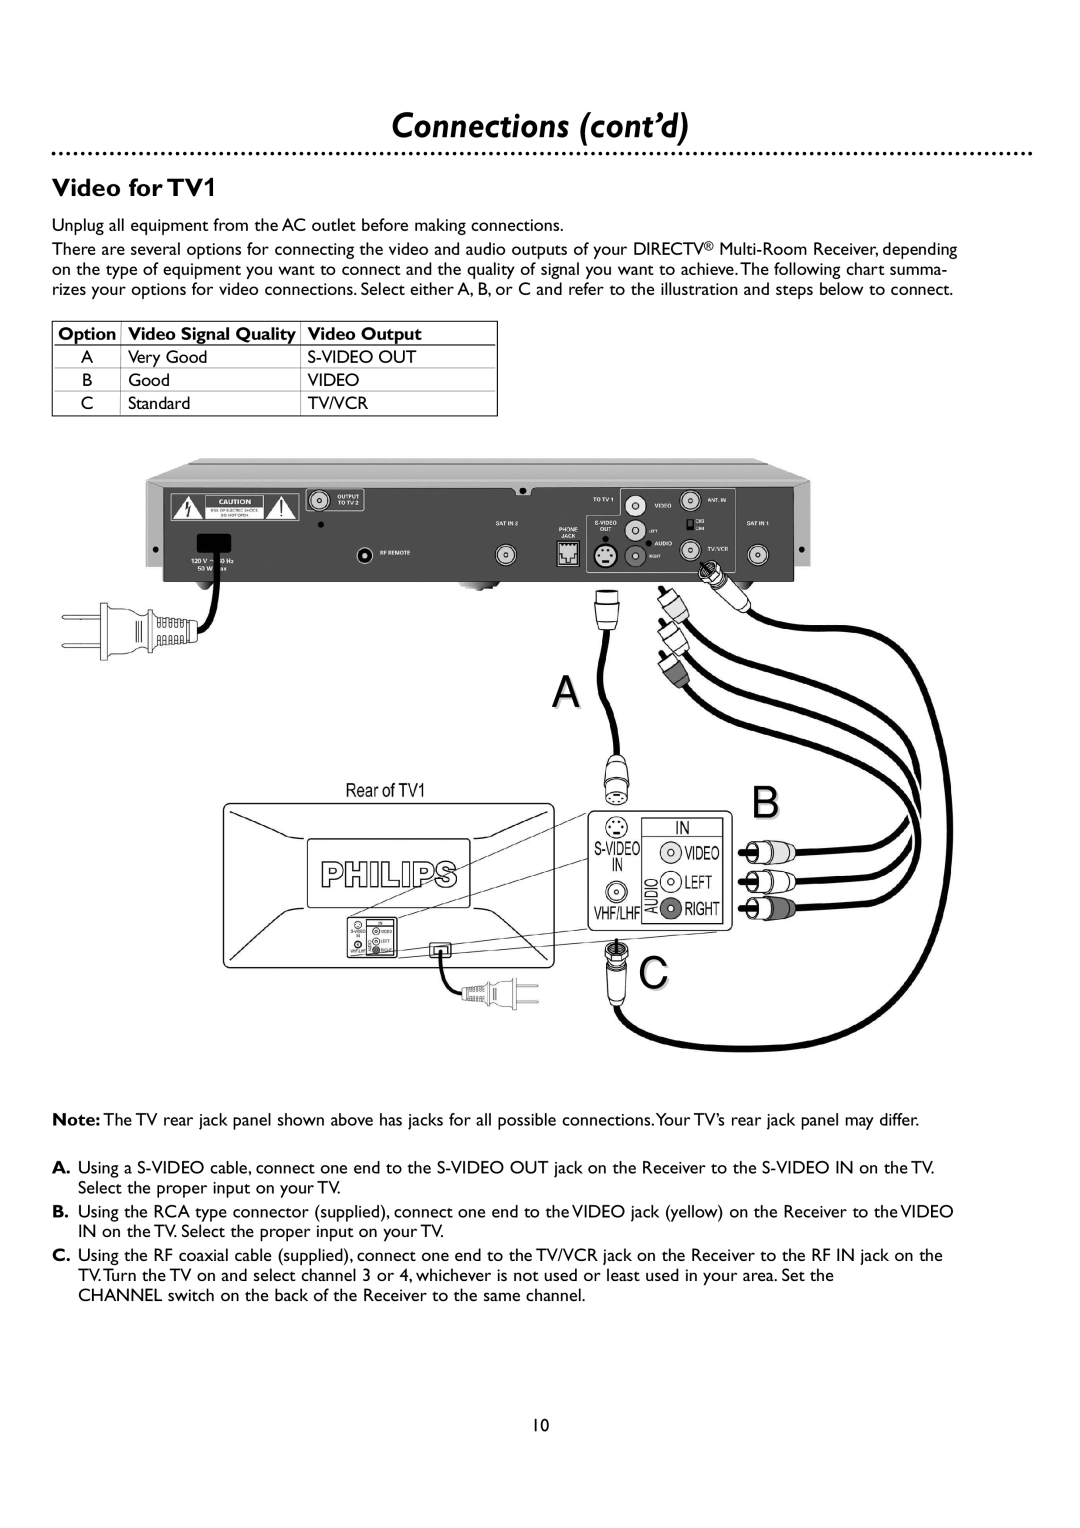 DirecTV DSR 660 manual Connections cont’d, Video for TV1, Option Video Signal Quality Video Output, A B C 